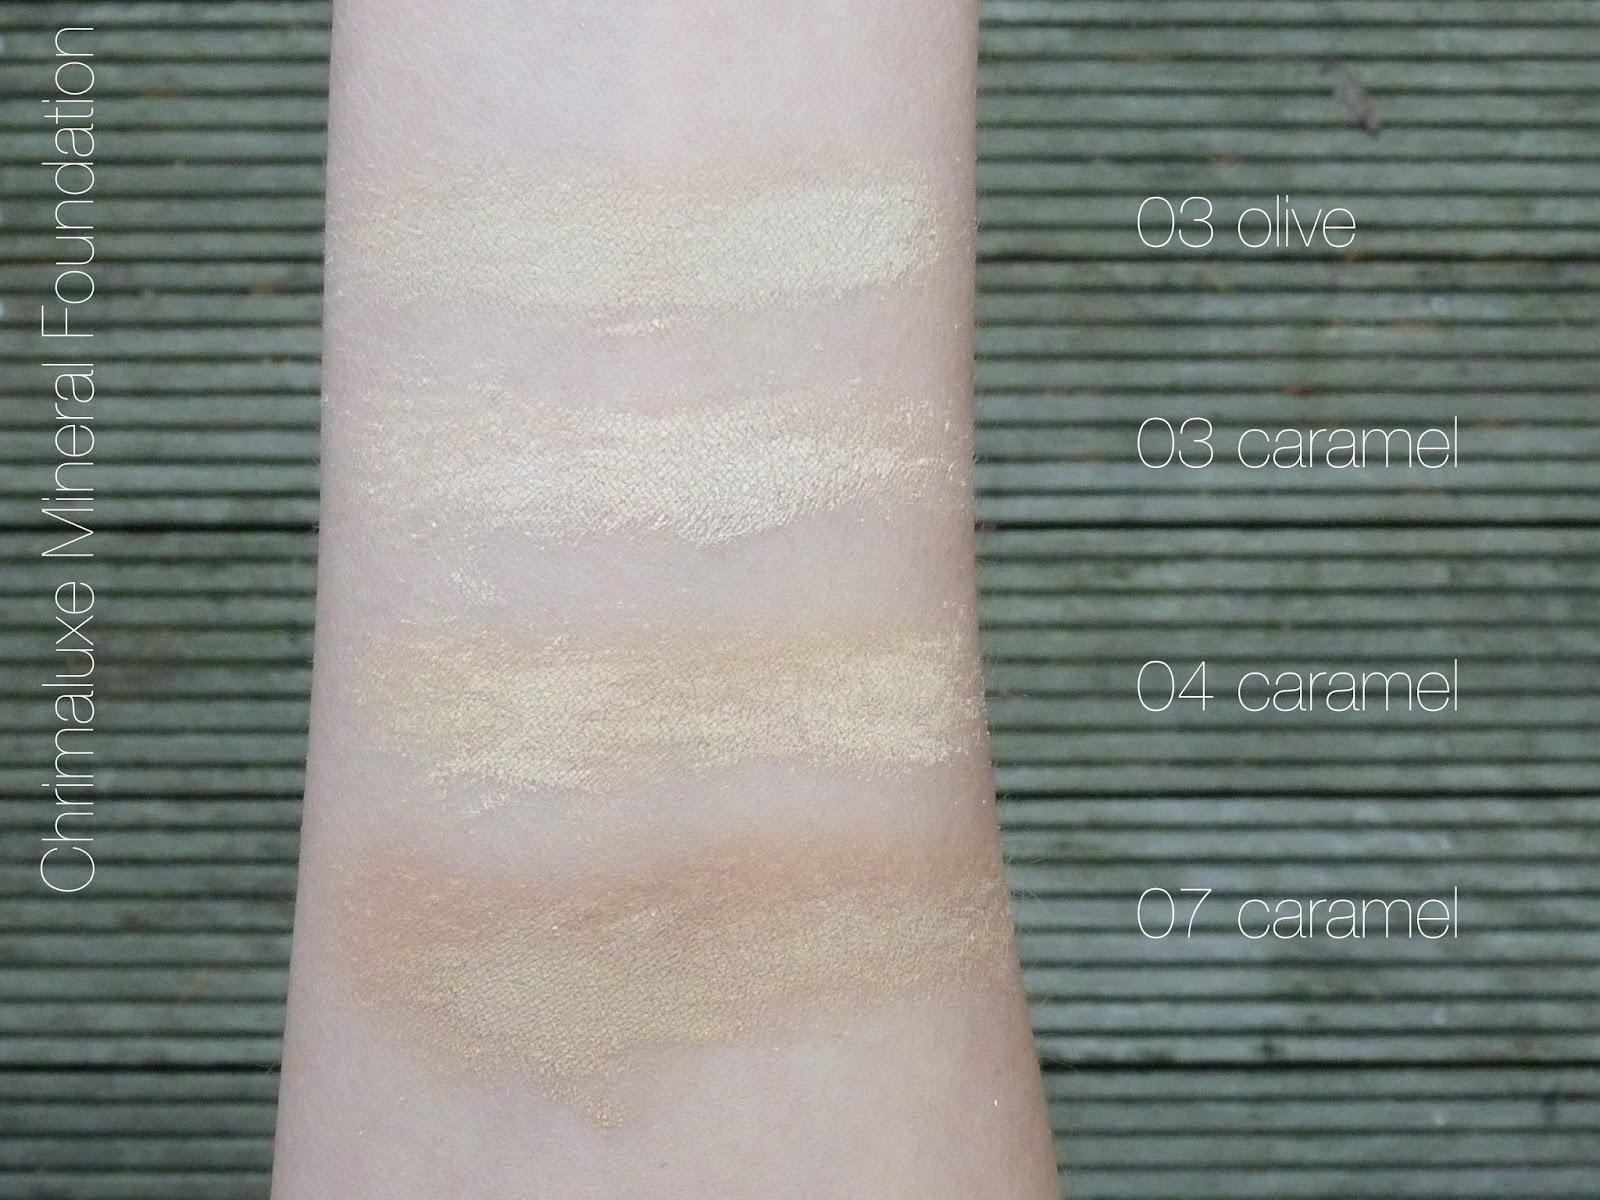 Chrimaluxe Mineral Foundation Swatches